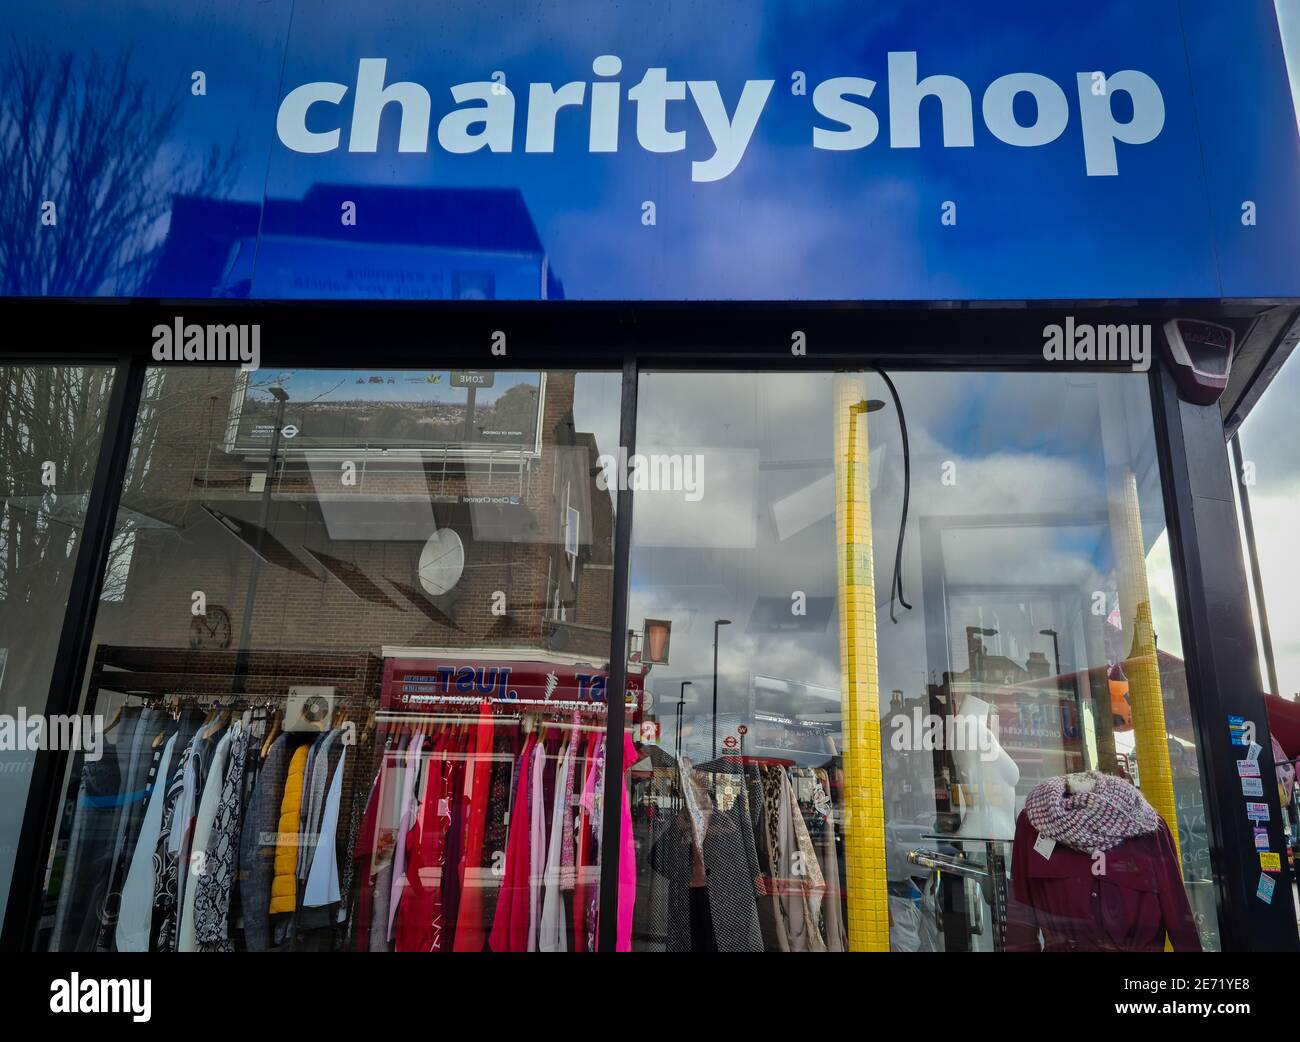 A charity shop selling donated goods to raise money for good causes. Stock Photo